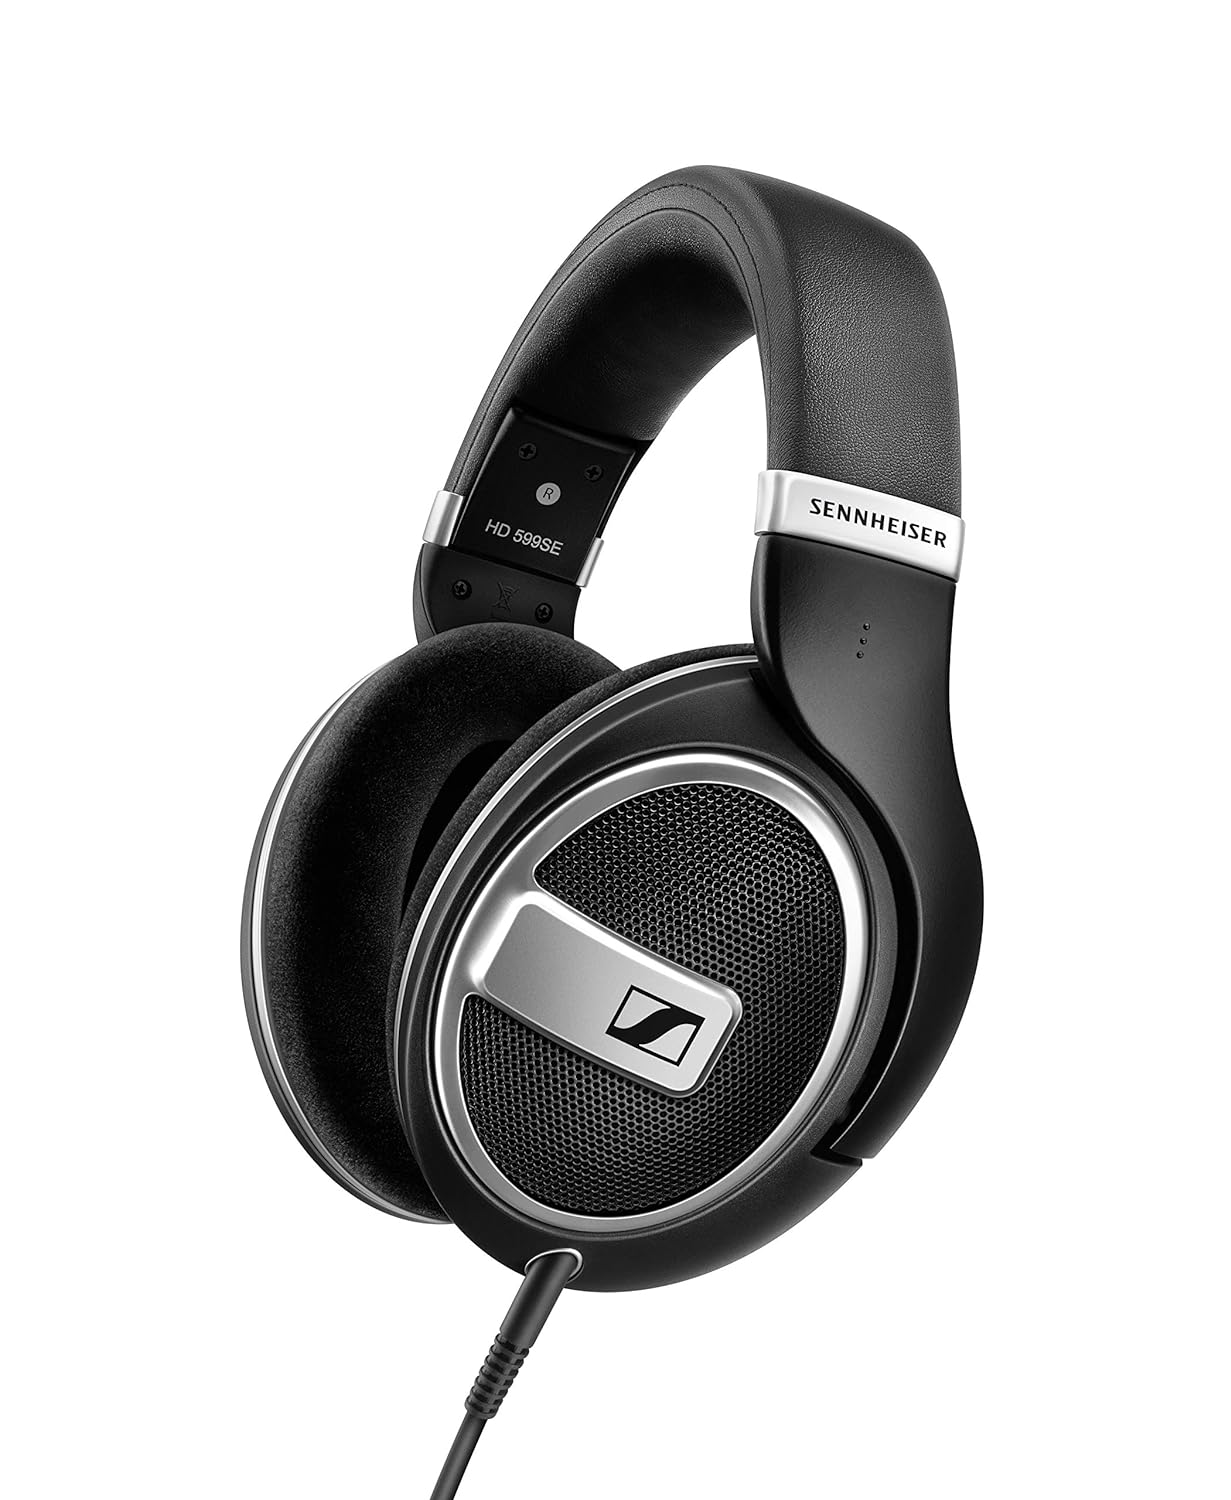 (Open Box) Sennheiser HD 599 Special Edition Wired, Over The Ear Audiophile Headphones with E.A.R. Technology for Wide Sound Field, Open-Back Earcups, Detachable Cable (Black) Without Mic. 2-Year Warranty (Grade - A+)